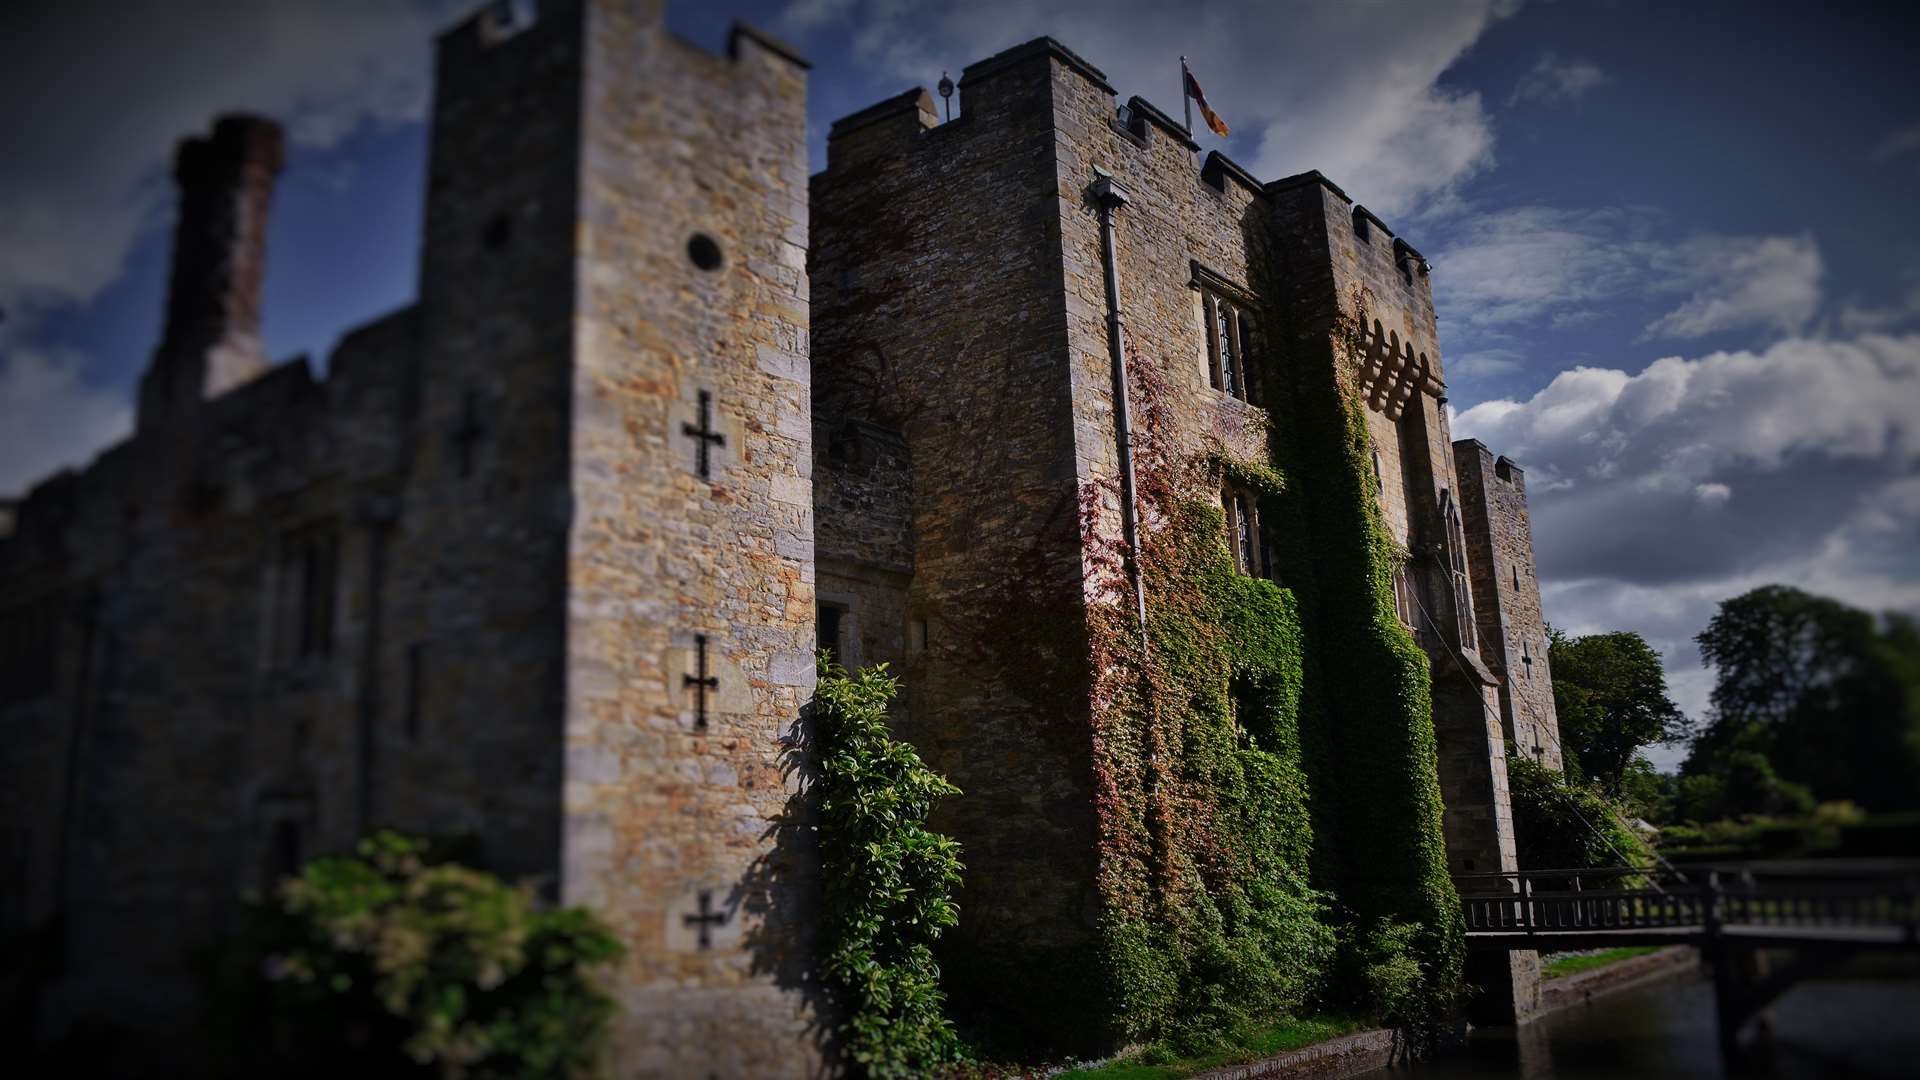 See Hever after dark this Halloween